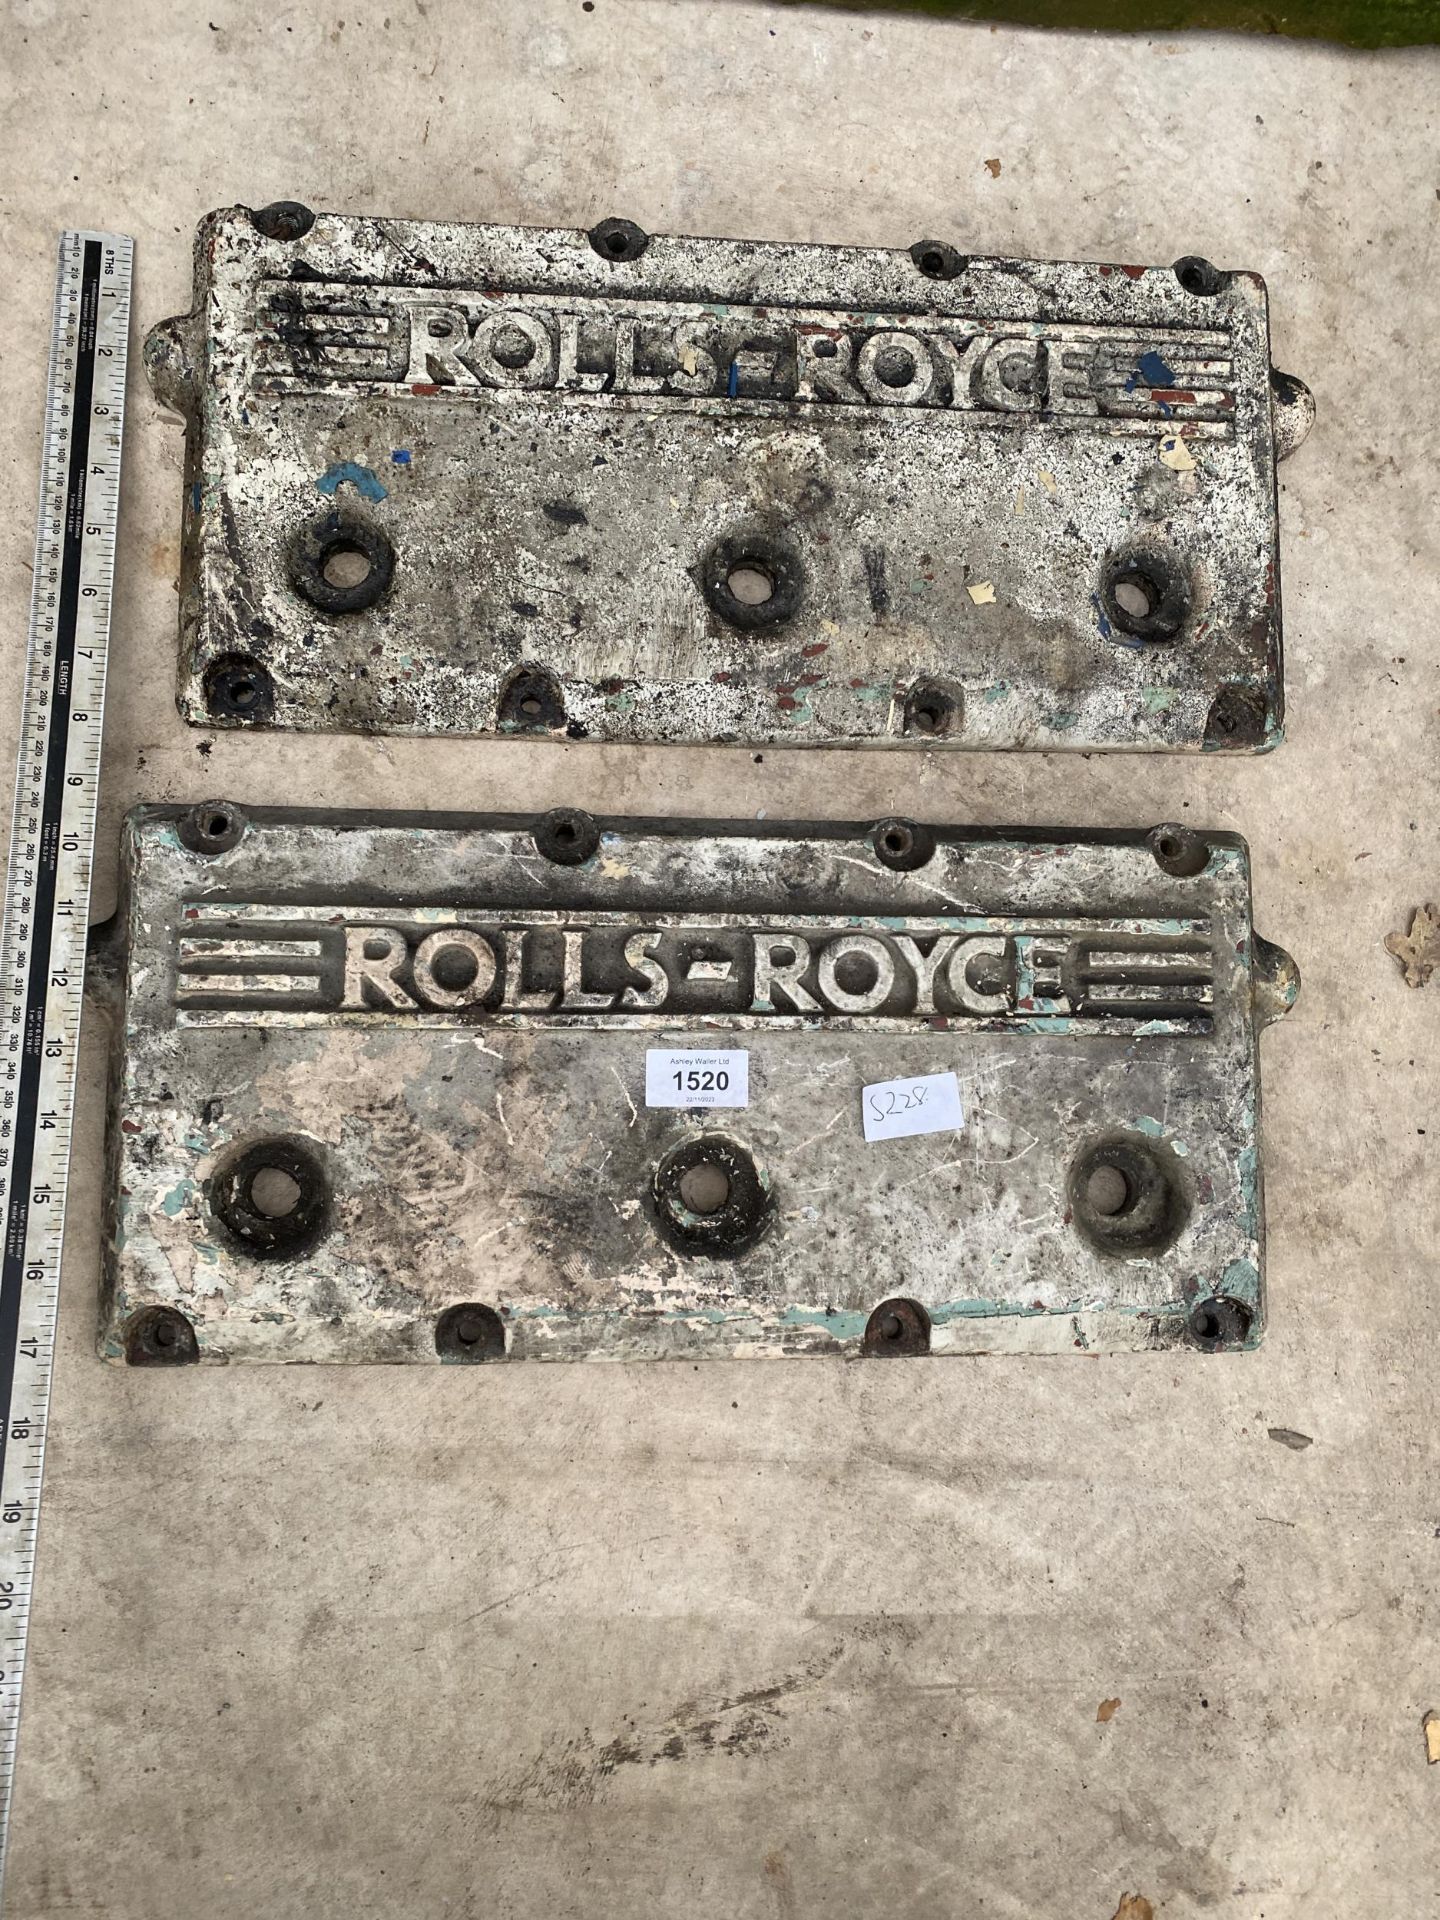 A PAIR OF 'ROLLS-ROYCE' ENGINE CAM COVERS - Image 2 of 2